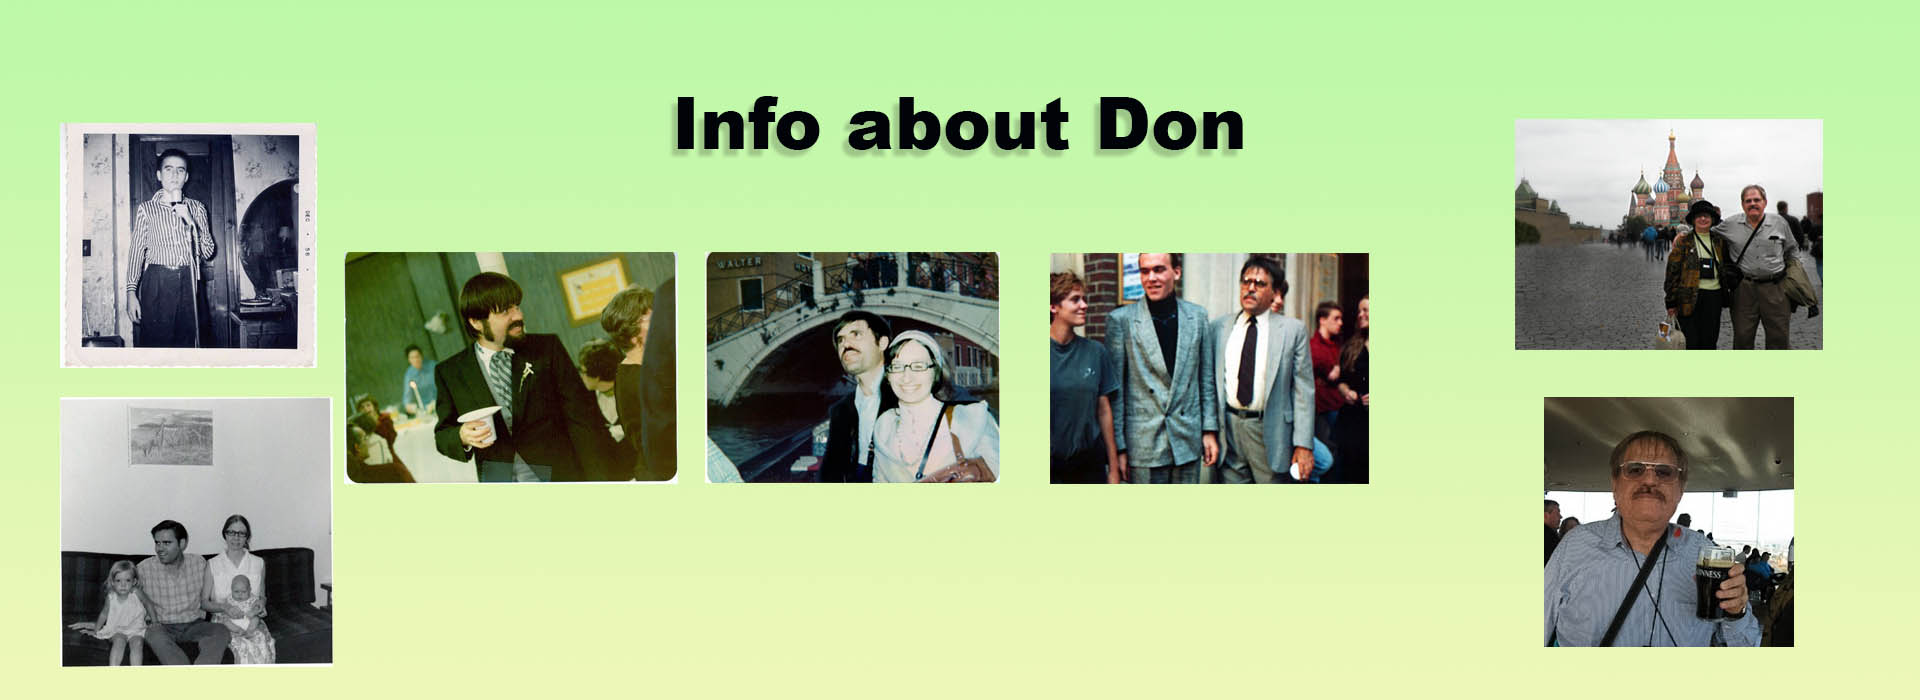 About Don 